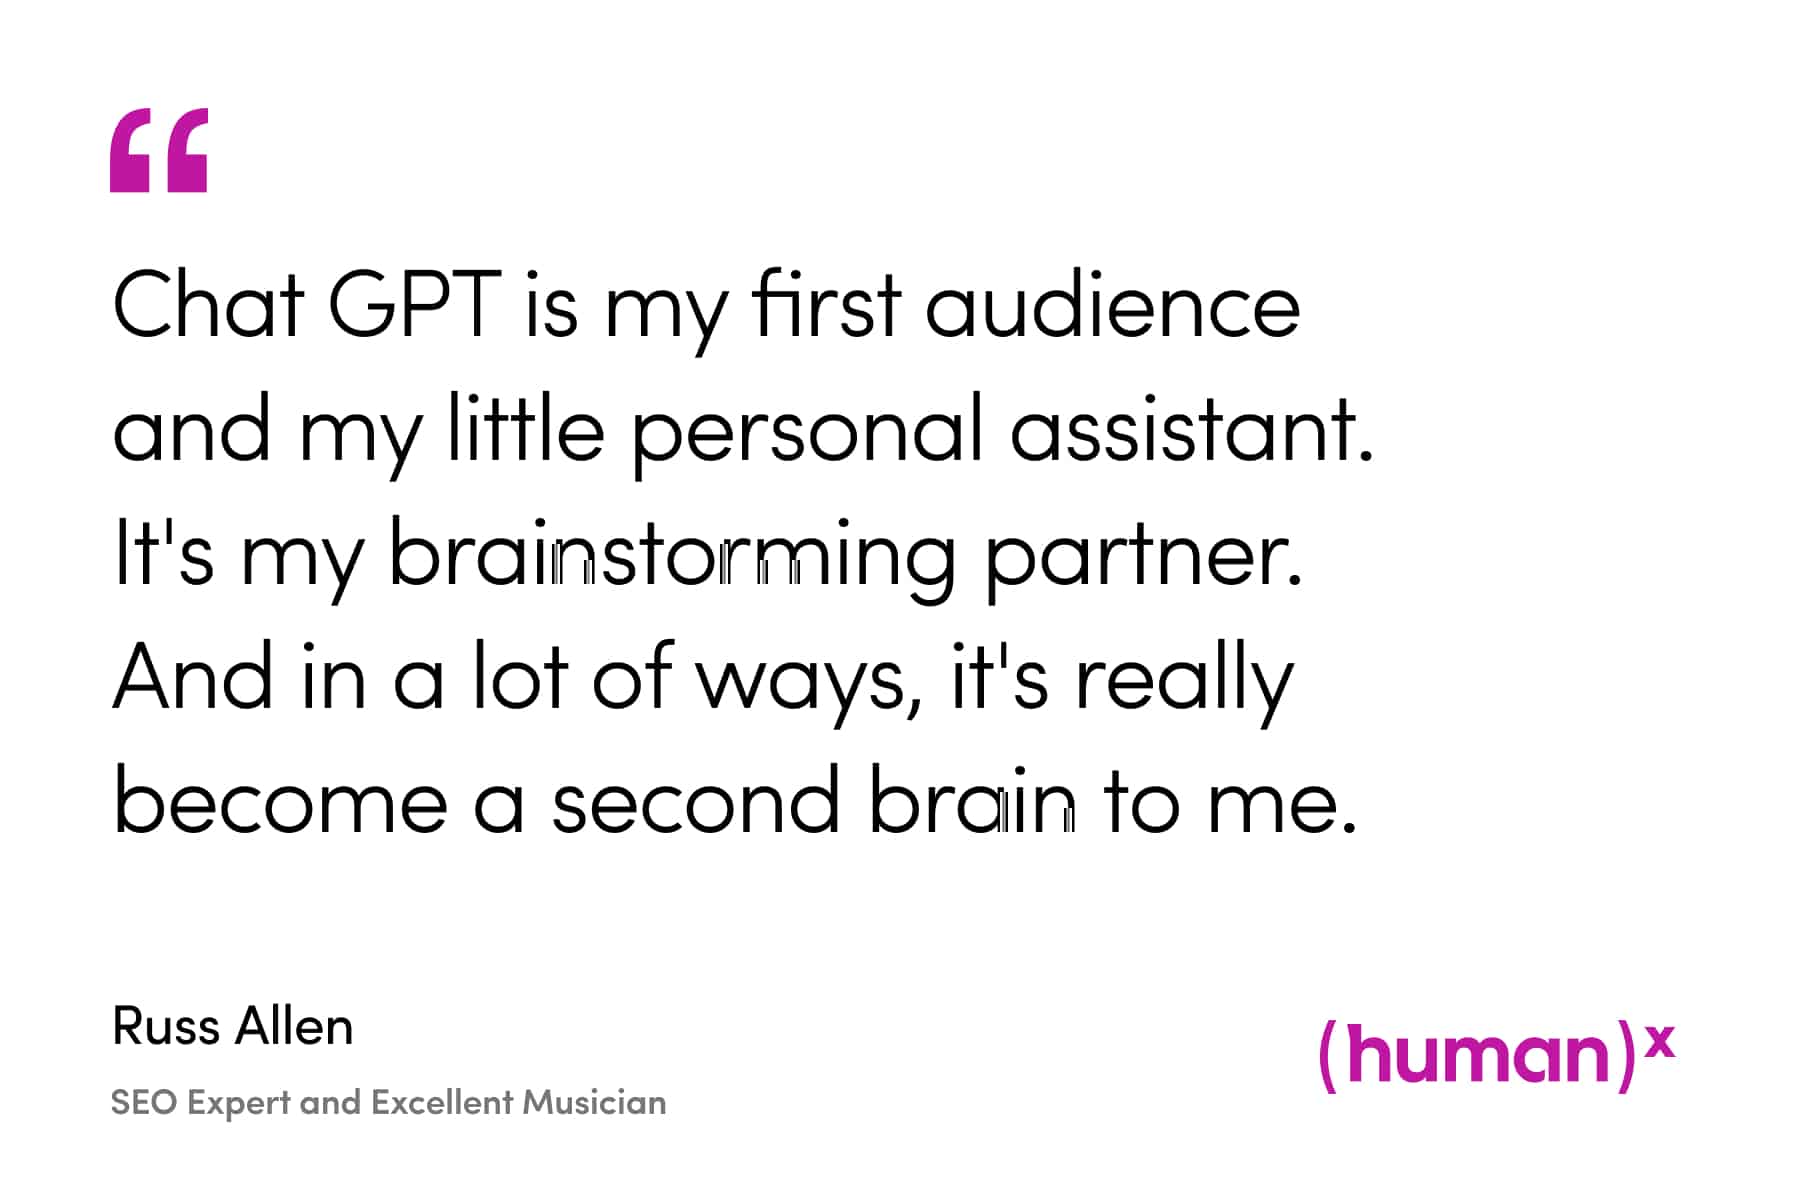 quote from Russ Allen, "ChatGPT is my first audience and my little personal assistant. It's my brainstorming partner. And in a lot of ways, it's really become a second brain to me."